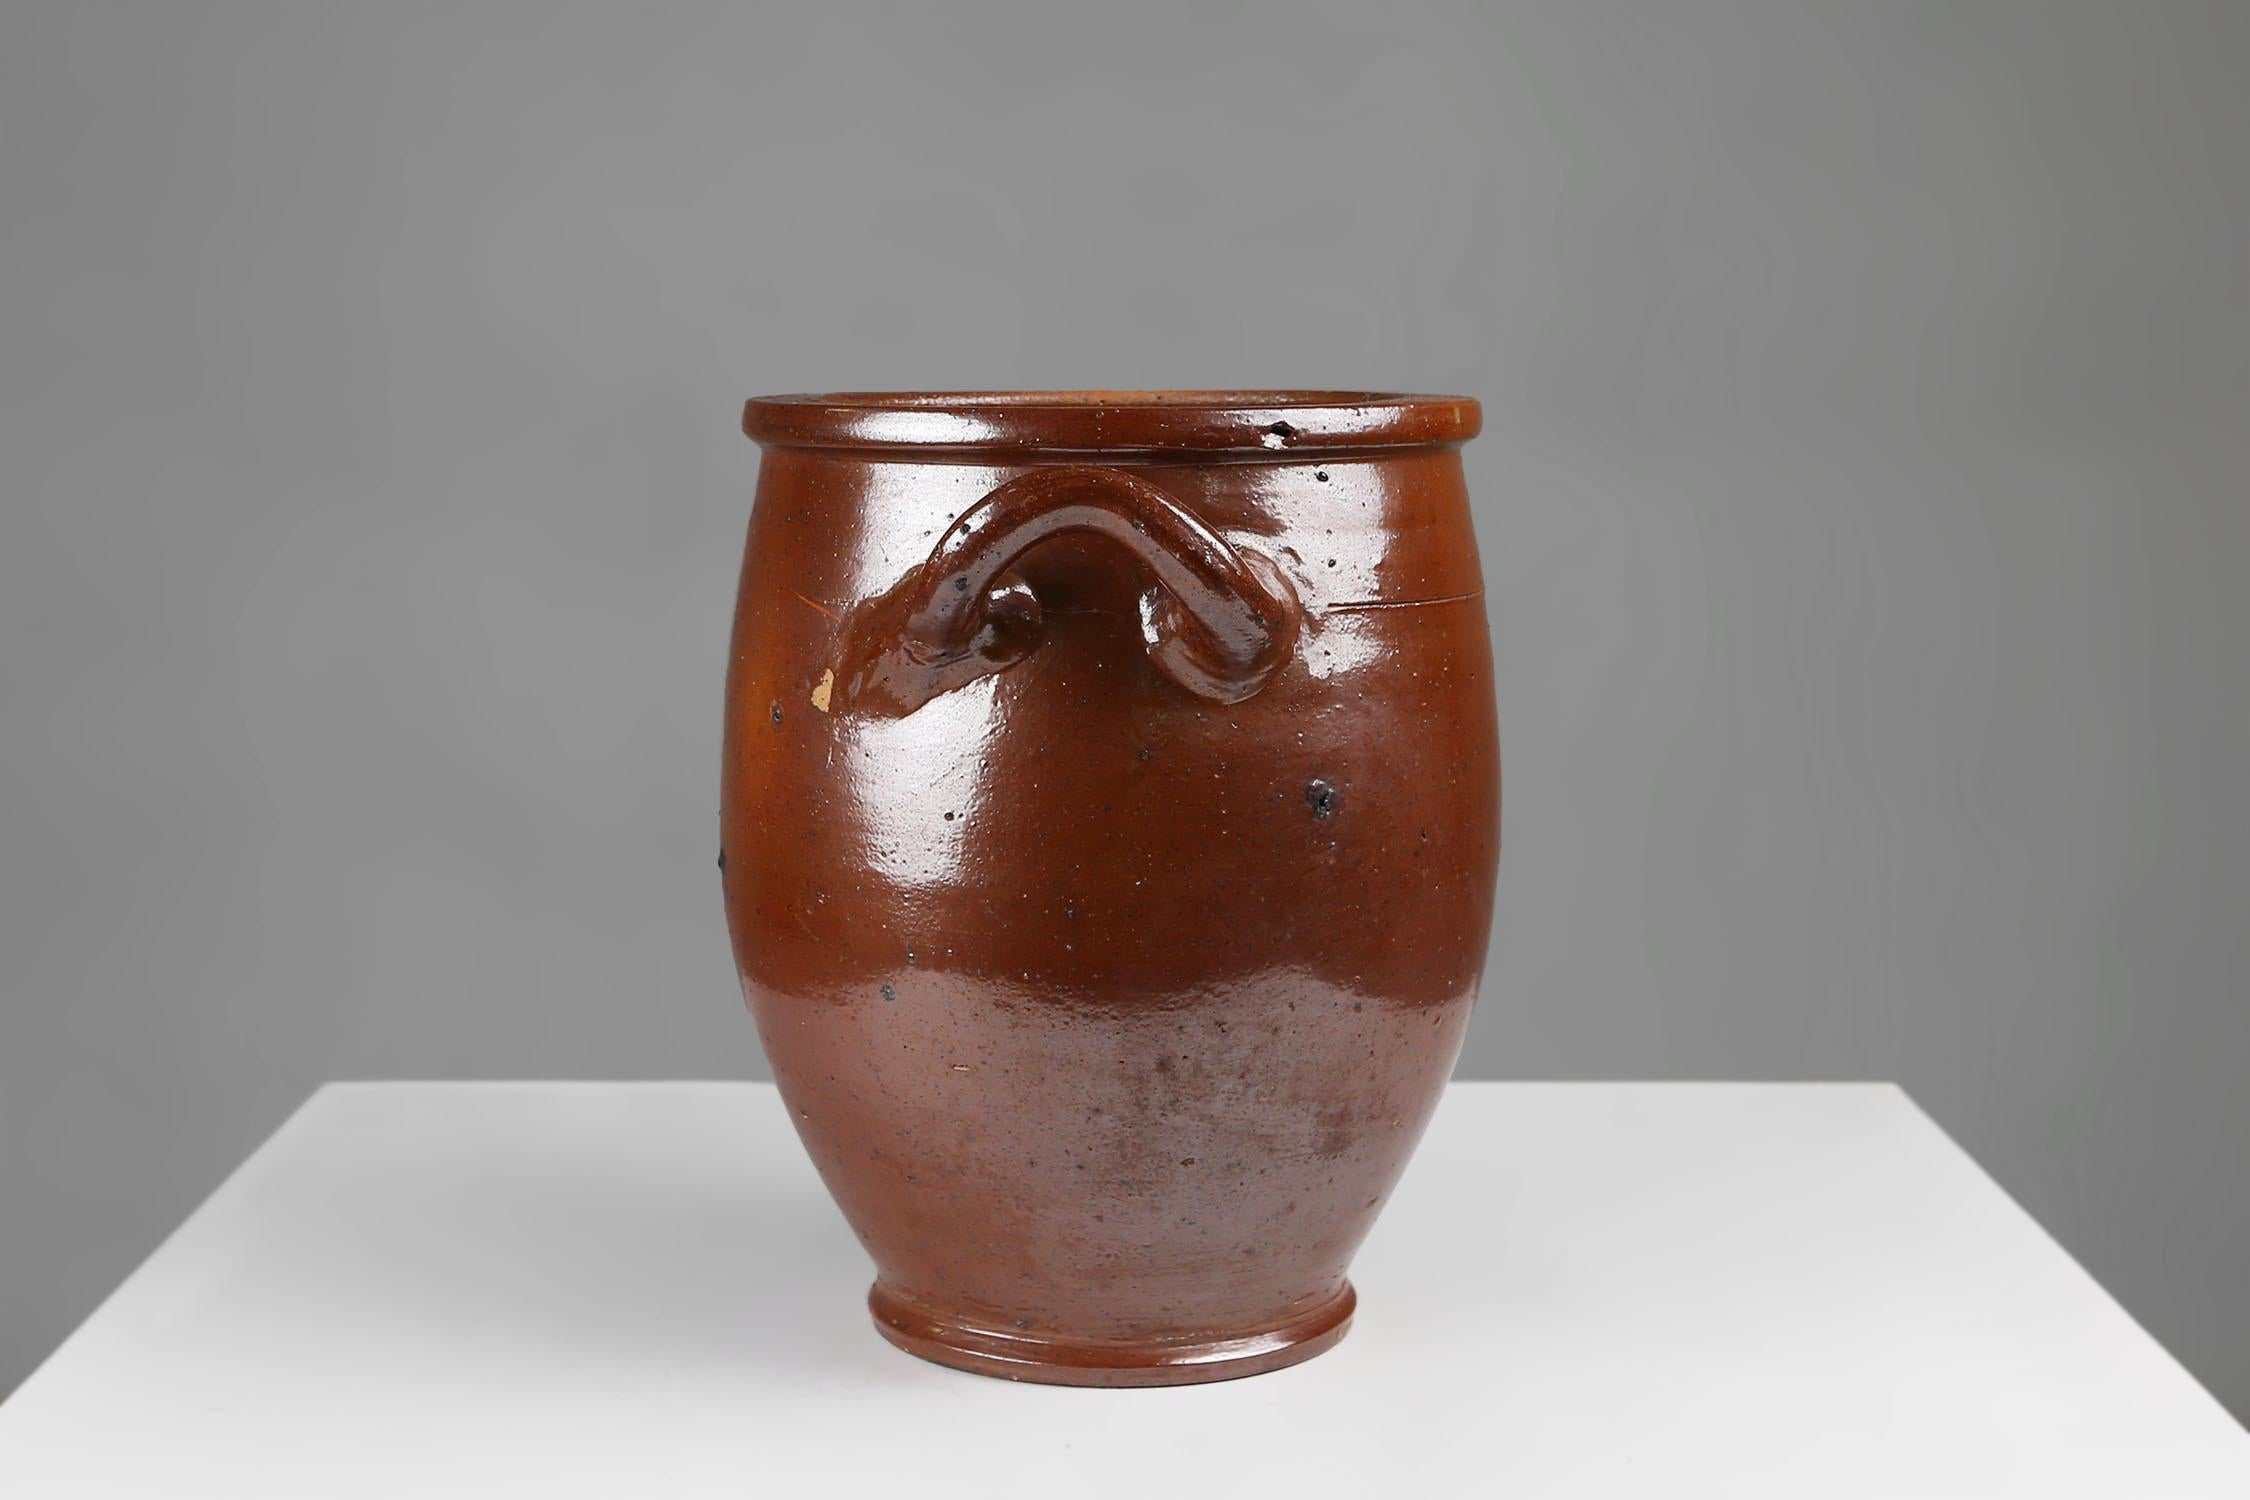 Belgium / 1800s / antique / ceramics / pot / brown glazed   A Belgian Ceramic Pot from the 1800s, a timeless piece that combines elegance and functionality. This large brown pot with handles on the side is a must-have addition to any kitchen or